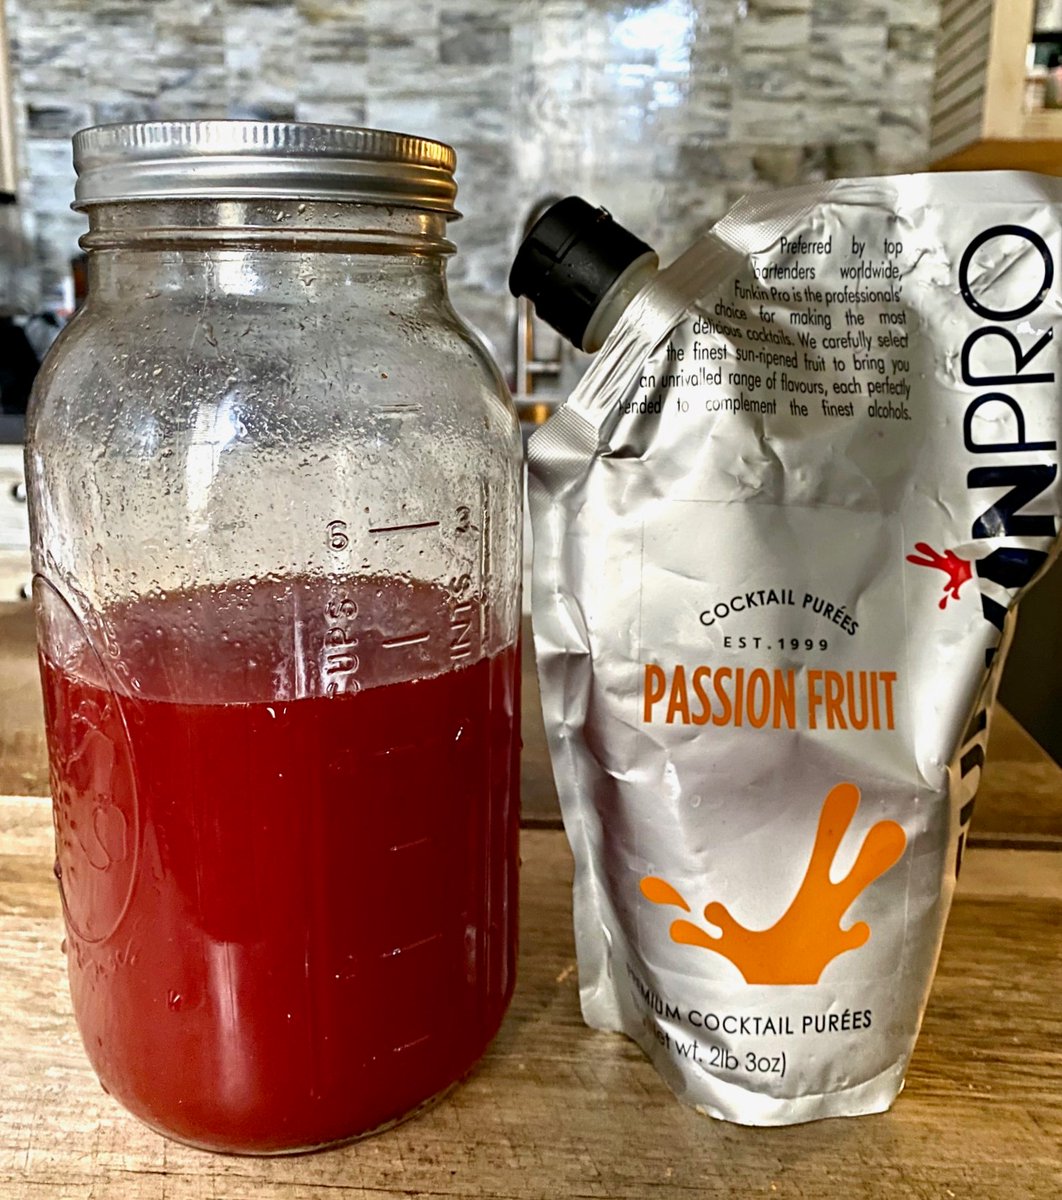 Now, you’ll need passion fruit purée, NOT syrup. The purée is quite tart. Add about ¼ as much purée as syrup, e.g. 8 oz of purée for 32 oz syrup.Stir. Refrigerate. If desired, add high proof alcohol to inhibit spoilage. Enjoy!